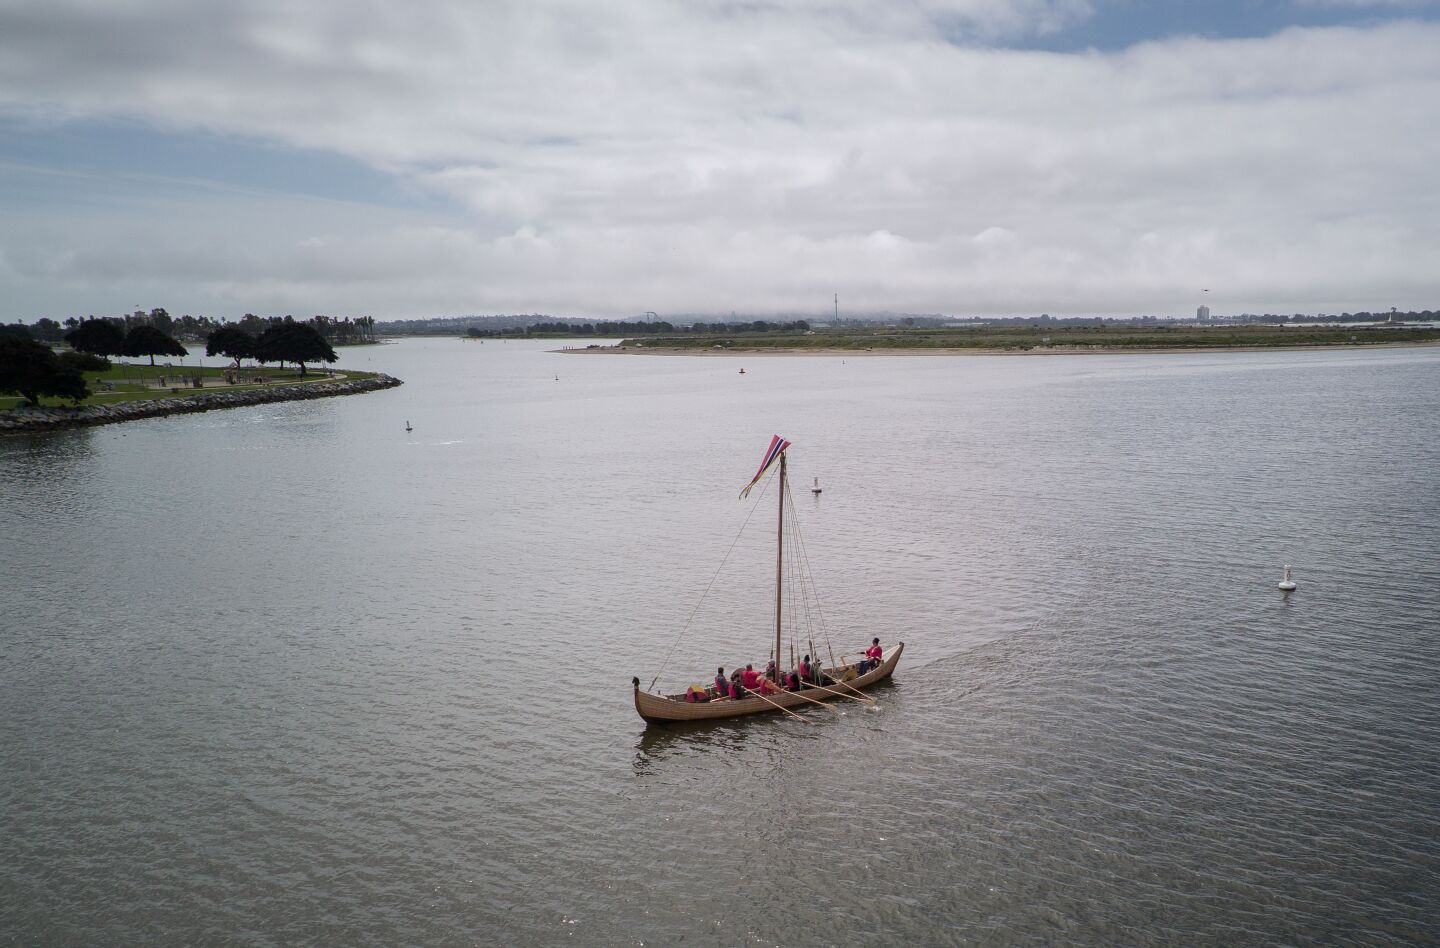 Maiden voyage of Viking ship replica Sleipnir at De Anza Cove area of Mission Bay. The ship driven by crew members using oars, makes its way across the De Anza Cove area of Mission Bay after it was lowered into the bay via the boat launching ramp.